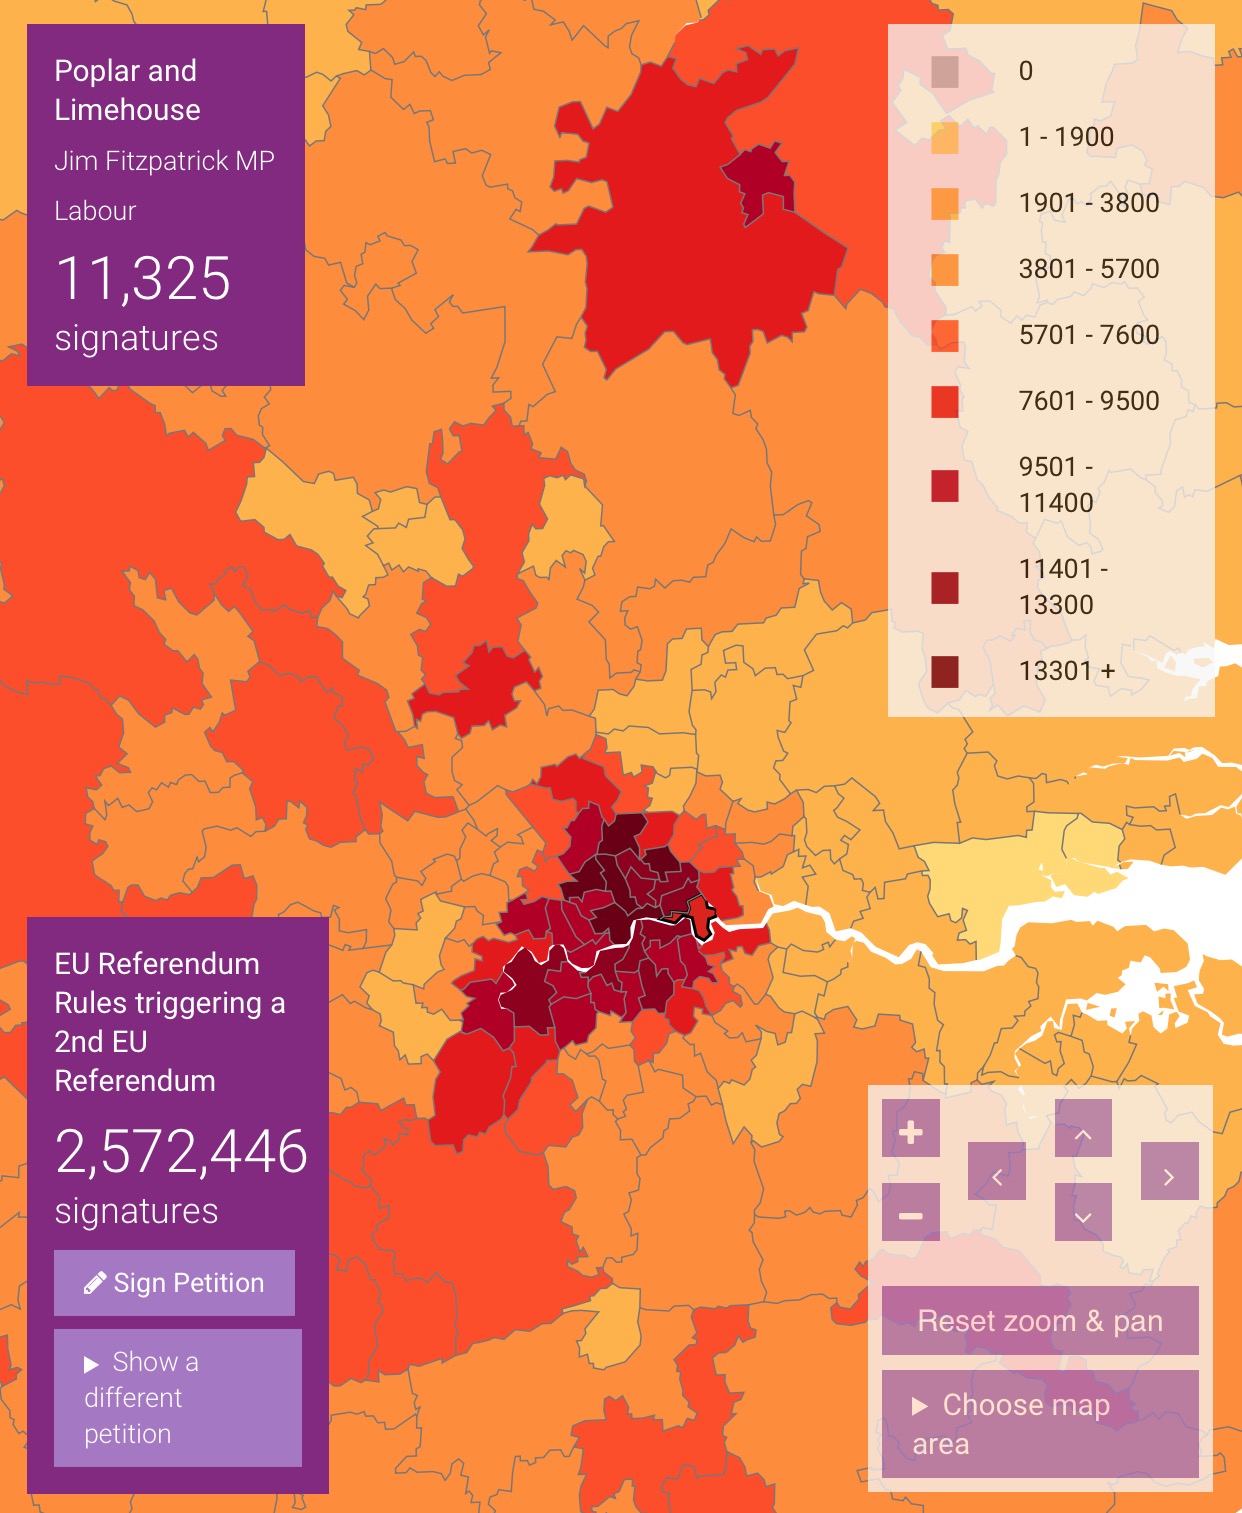 Poplar and Limehouse residents has signed over 11000 times. Image: http://petitionmap.unboxedconsulting.com/?petition=131215